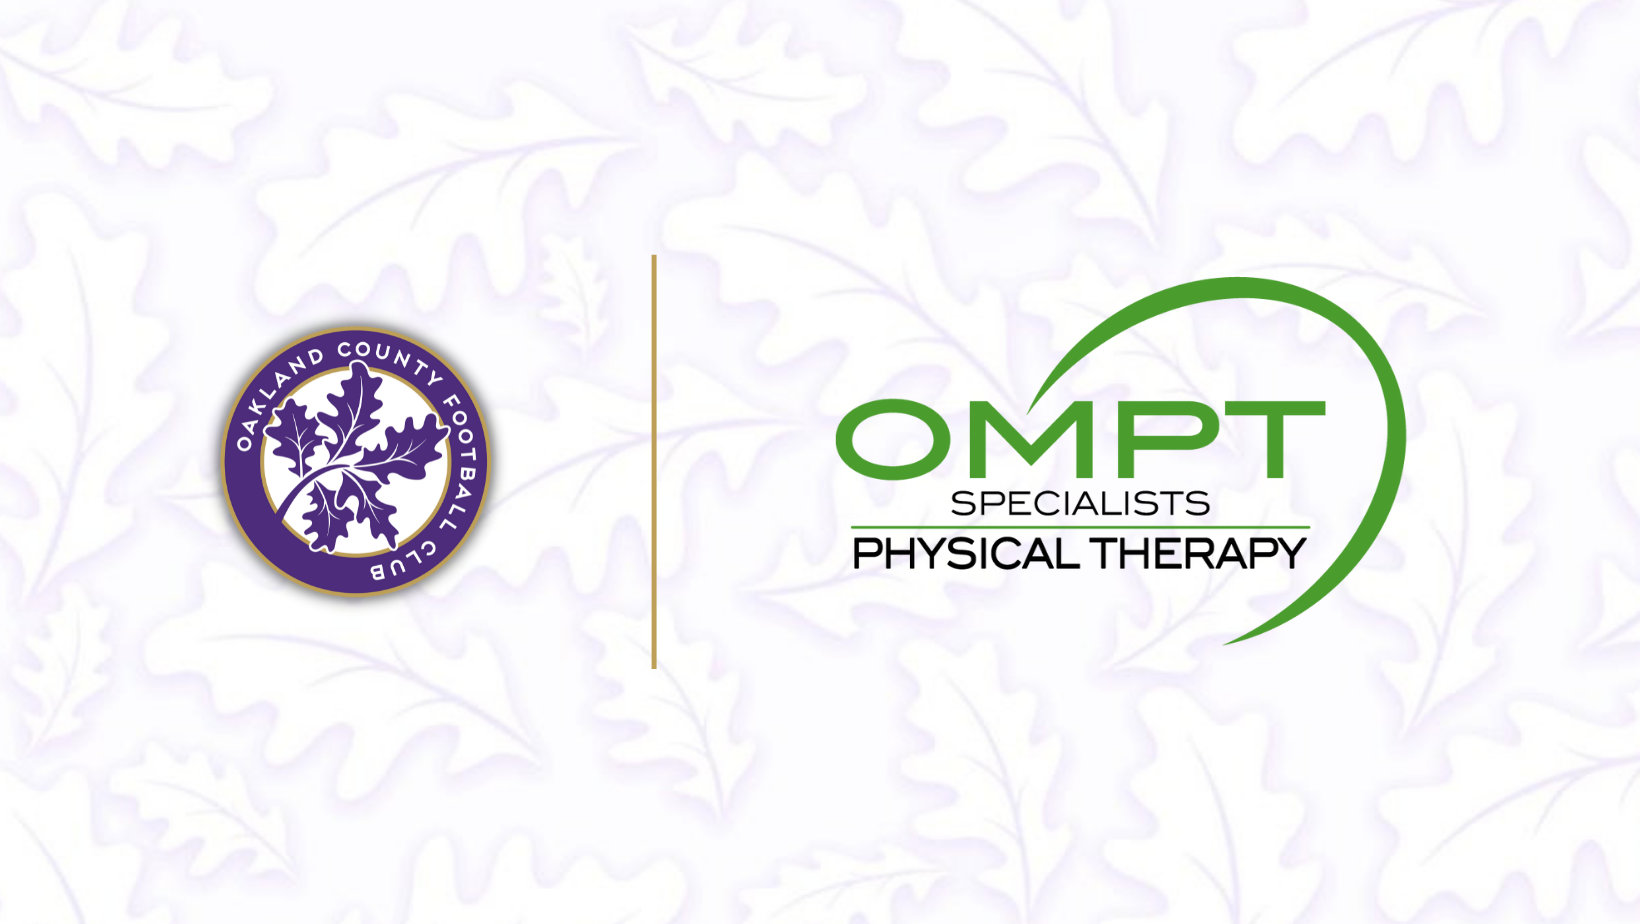 OMPT Specialists